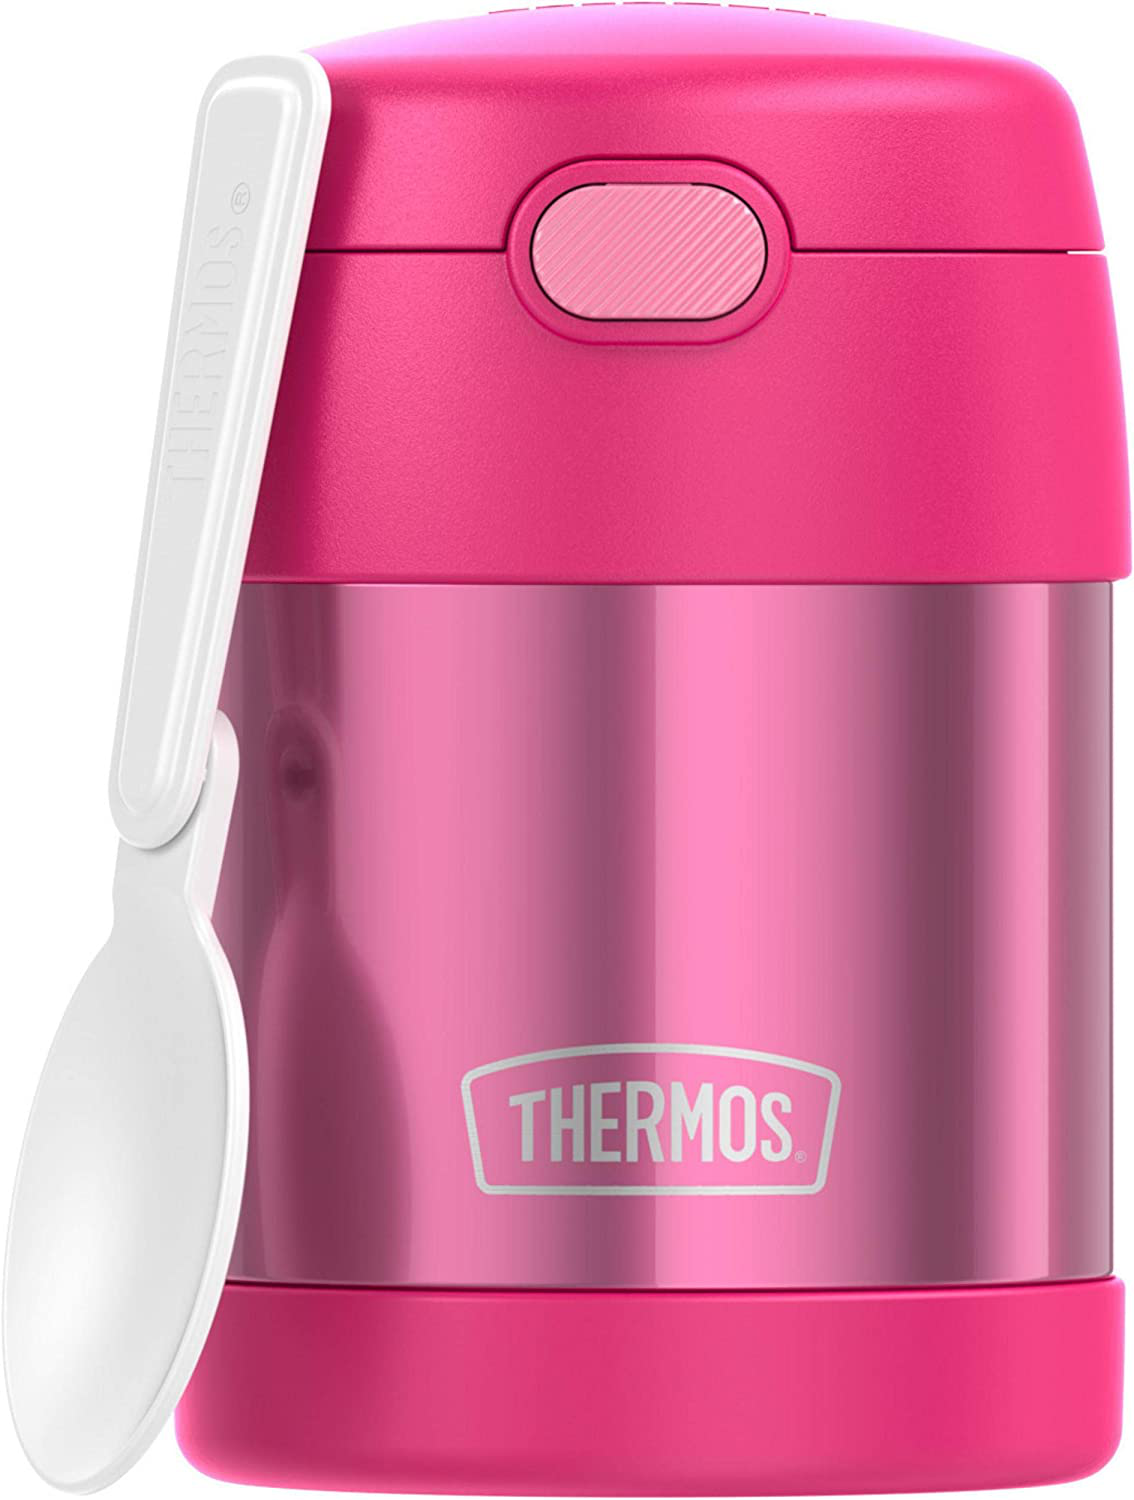 THERMOS FUNTAINER 10 Ounce Stainless Steel Vacuum Insulated Kids Food Jar with Folding Spoon, Pink